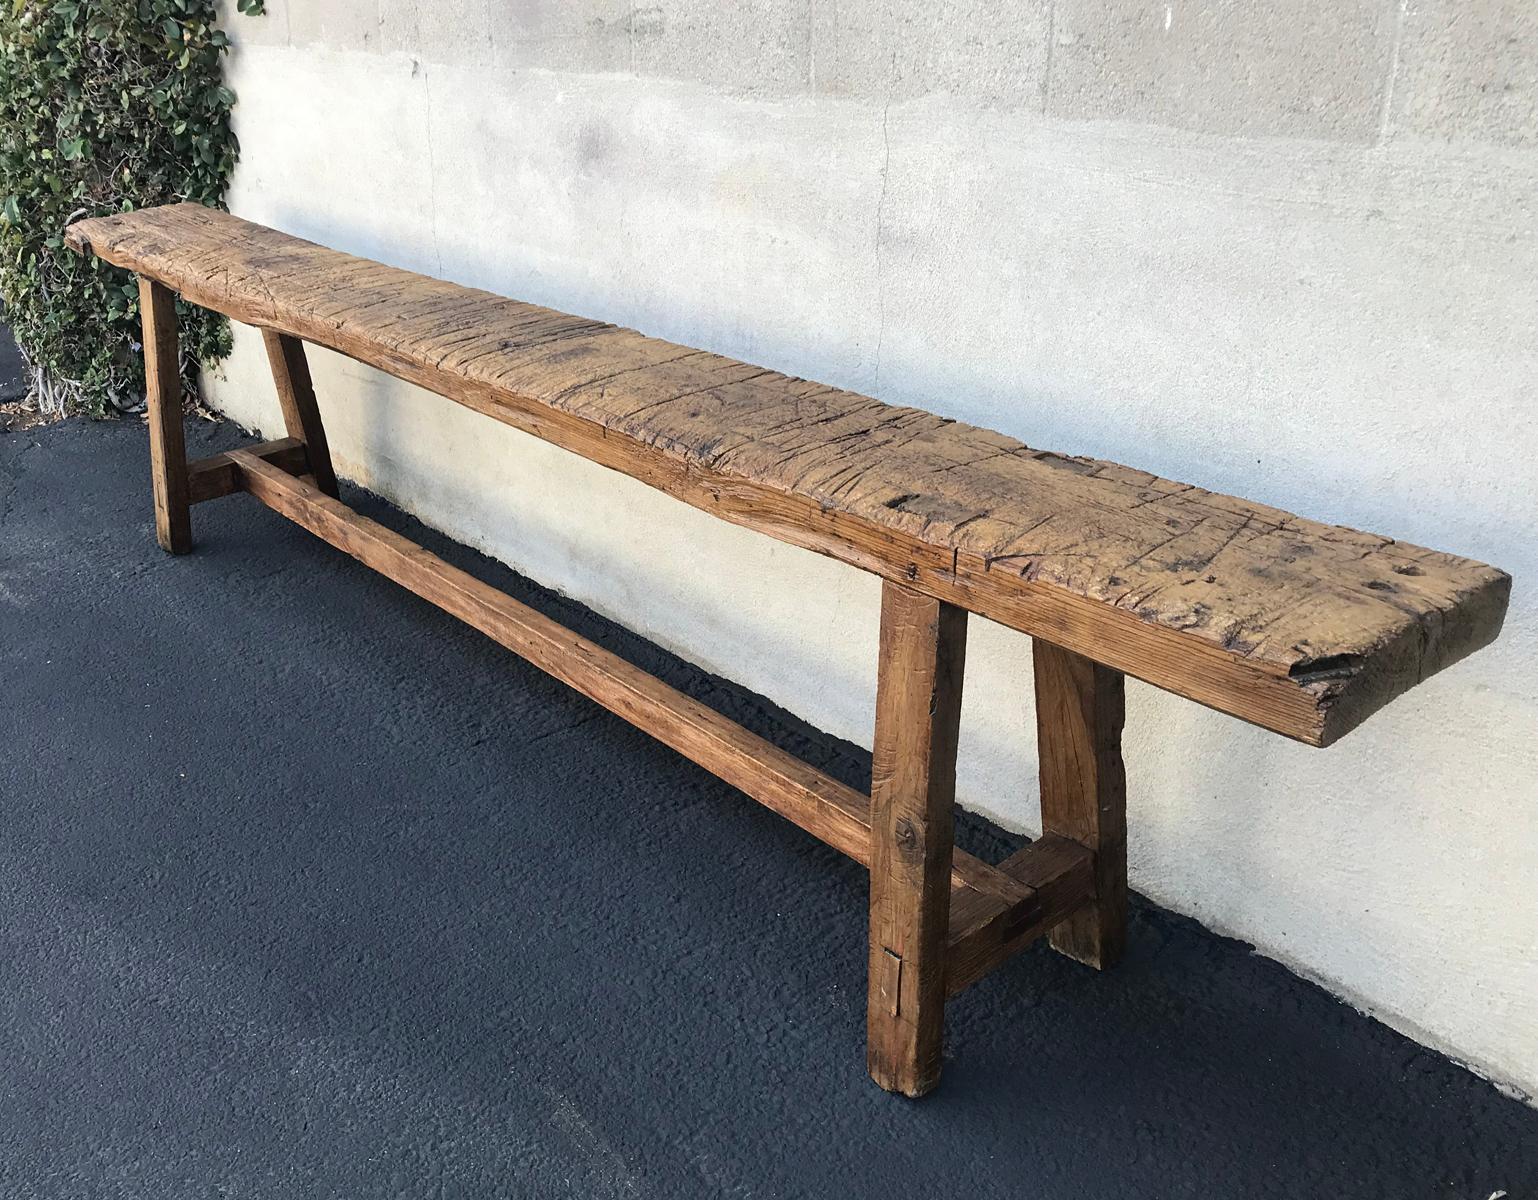 Early 20th century carpenter's bench from the highlands of Guatemala. It shows years of use and has a lovely, naturally worn patina. Saw marks. Smooth to the touch, beautiful color. Perfect piece behind a sofa or underneath artwork.